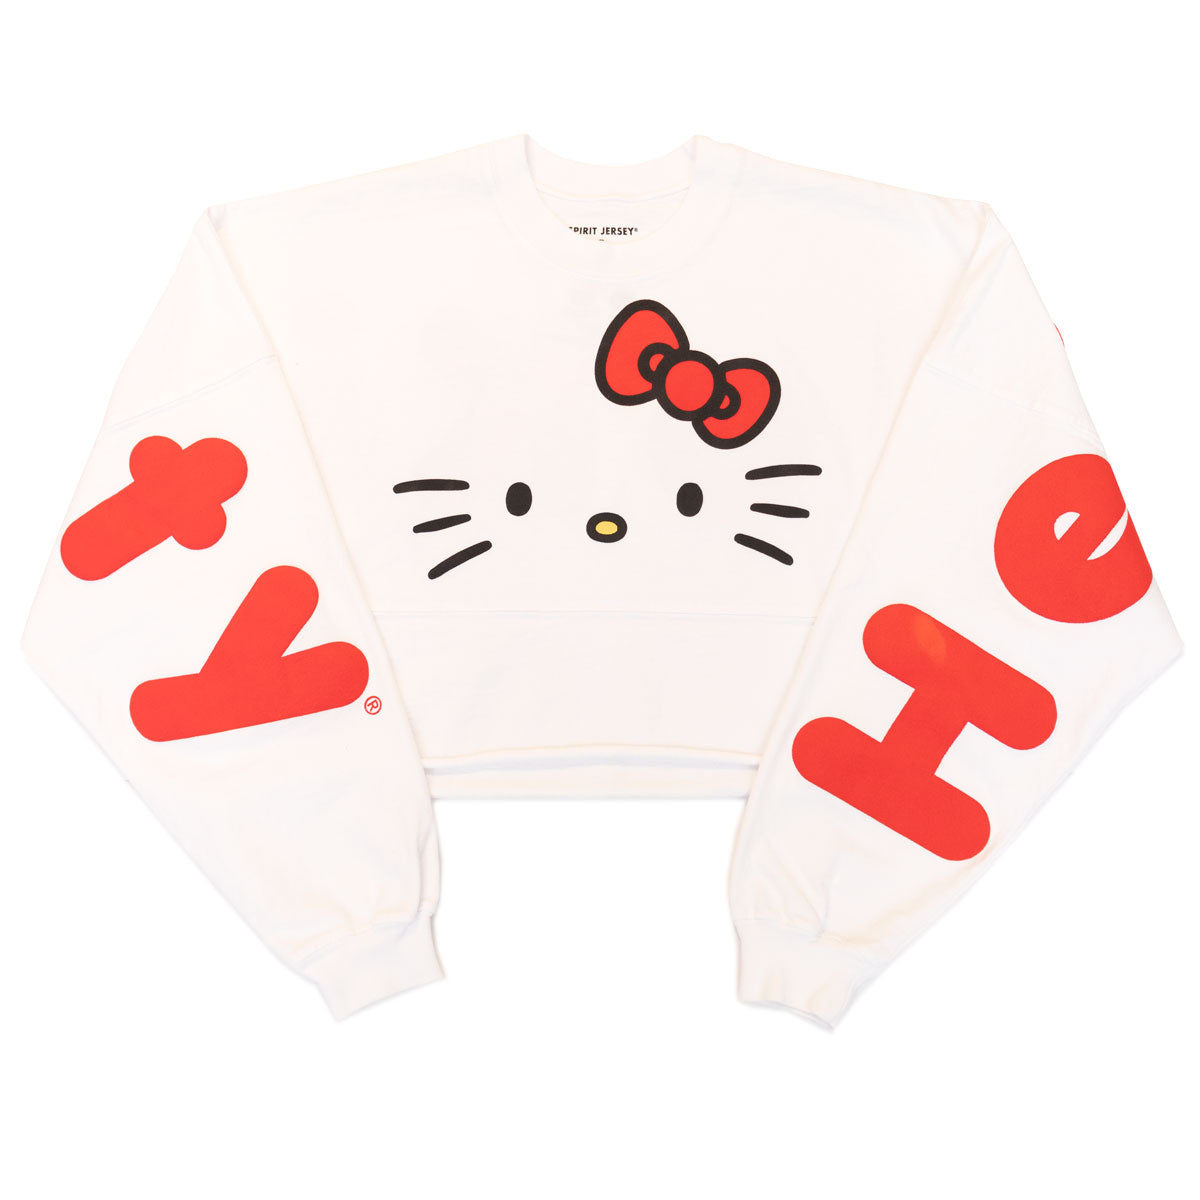 JapanLA X Hello Kitty and Friends by Spirit Jersey